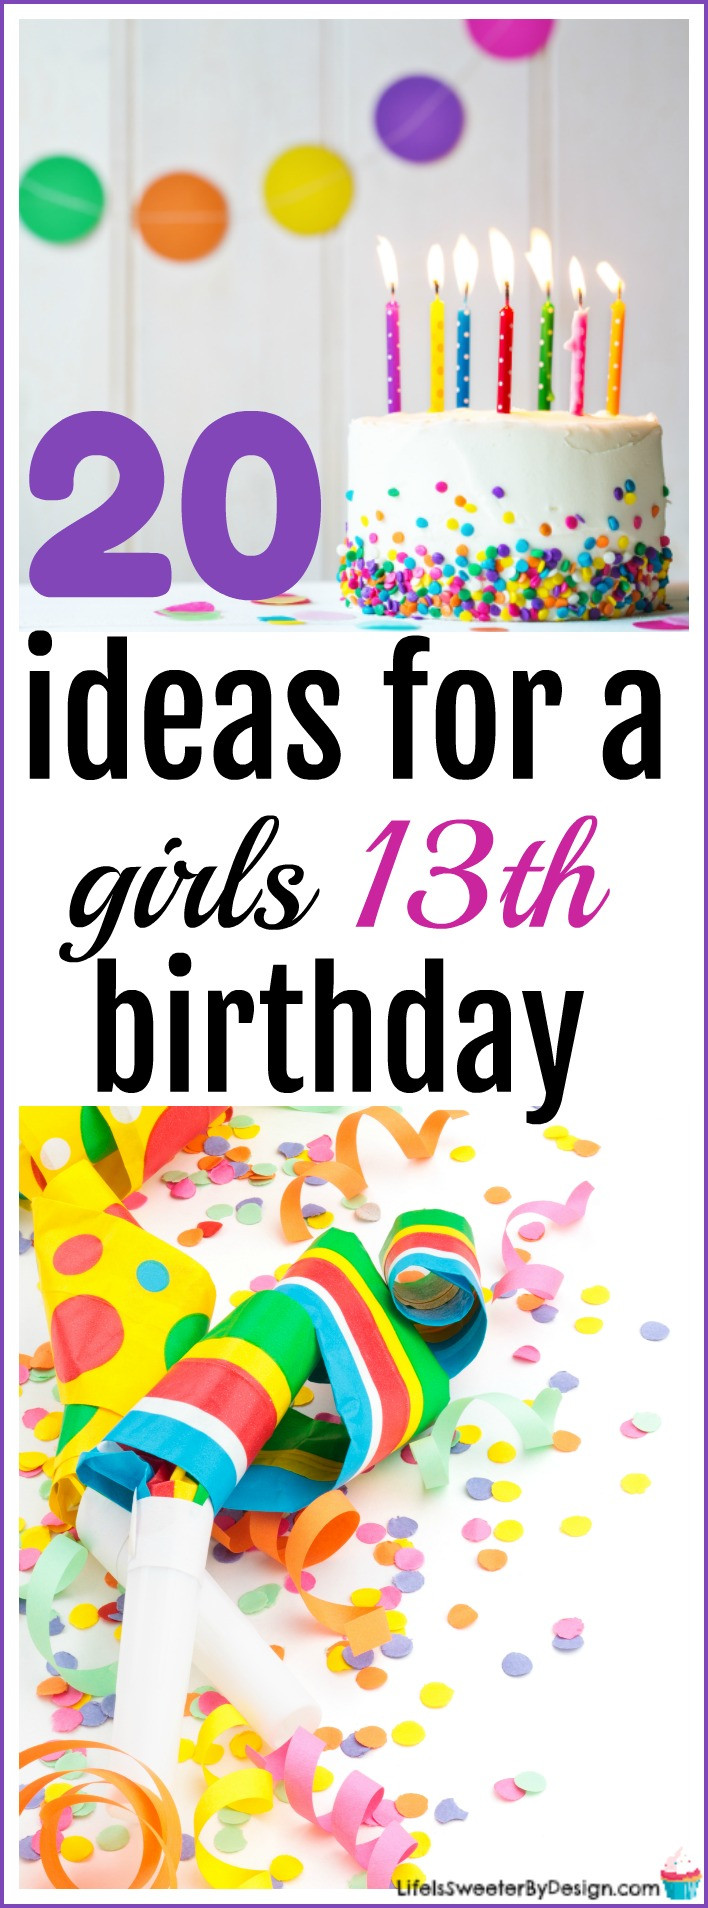 13Th Birthday Gift Ideas For Girl
 20 Ideas for a Girls 13th Birthday Life is Sweeter By Design